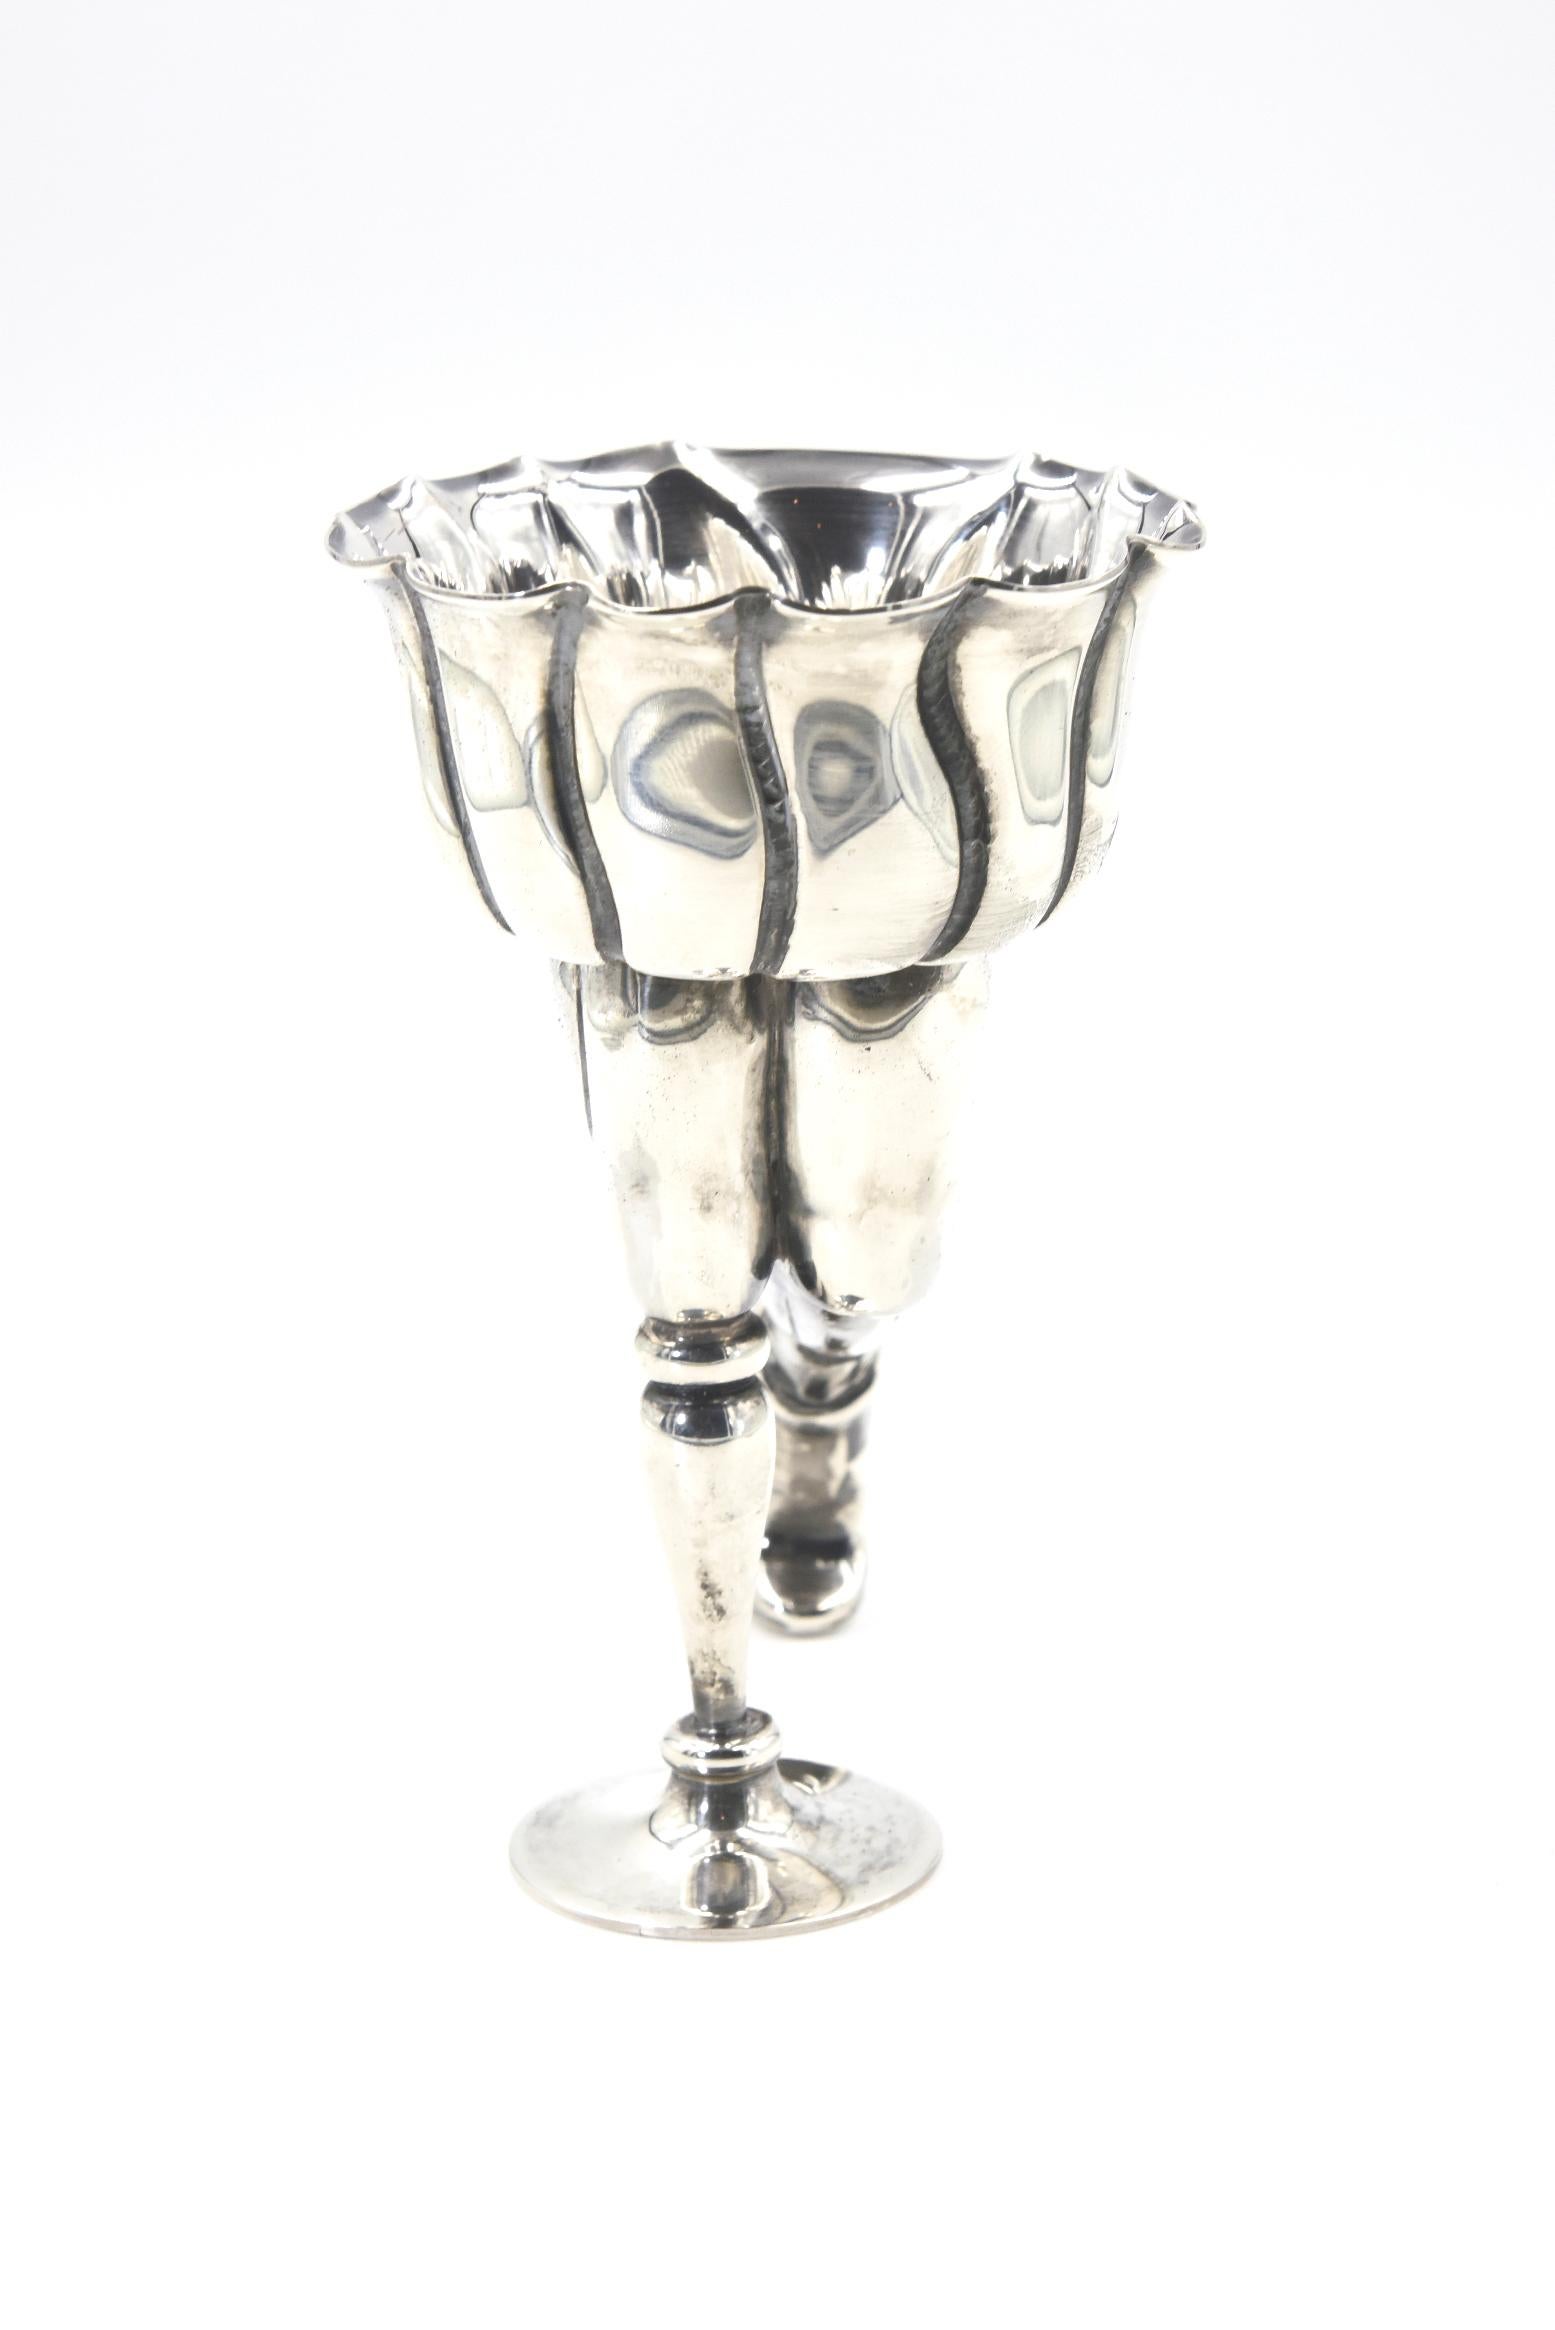 20th Century Rare Pampaloni Sterling Footed Figural Wine Cup from Bichierografia Collection